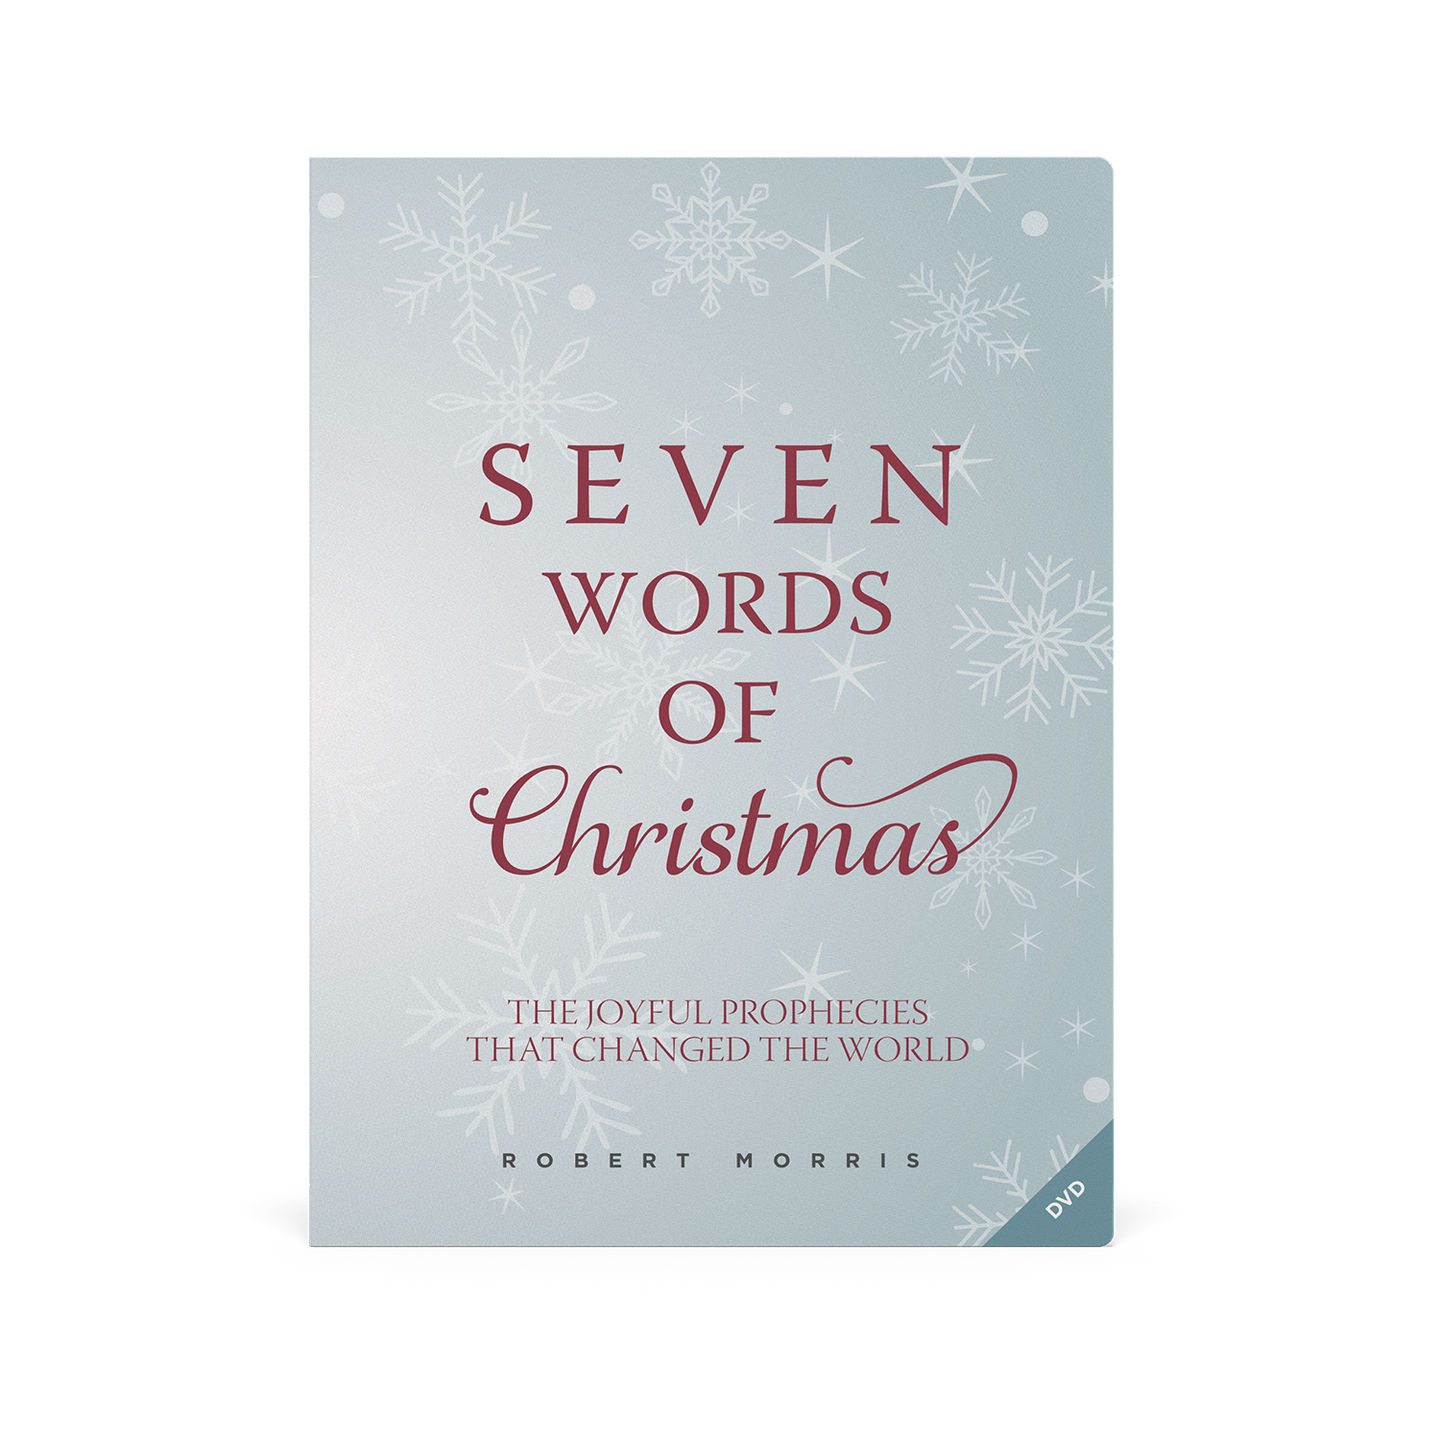 Special Offer: The Seven Words of Christmas DVD